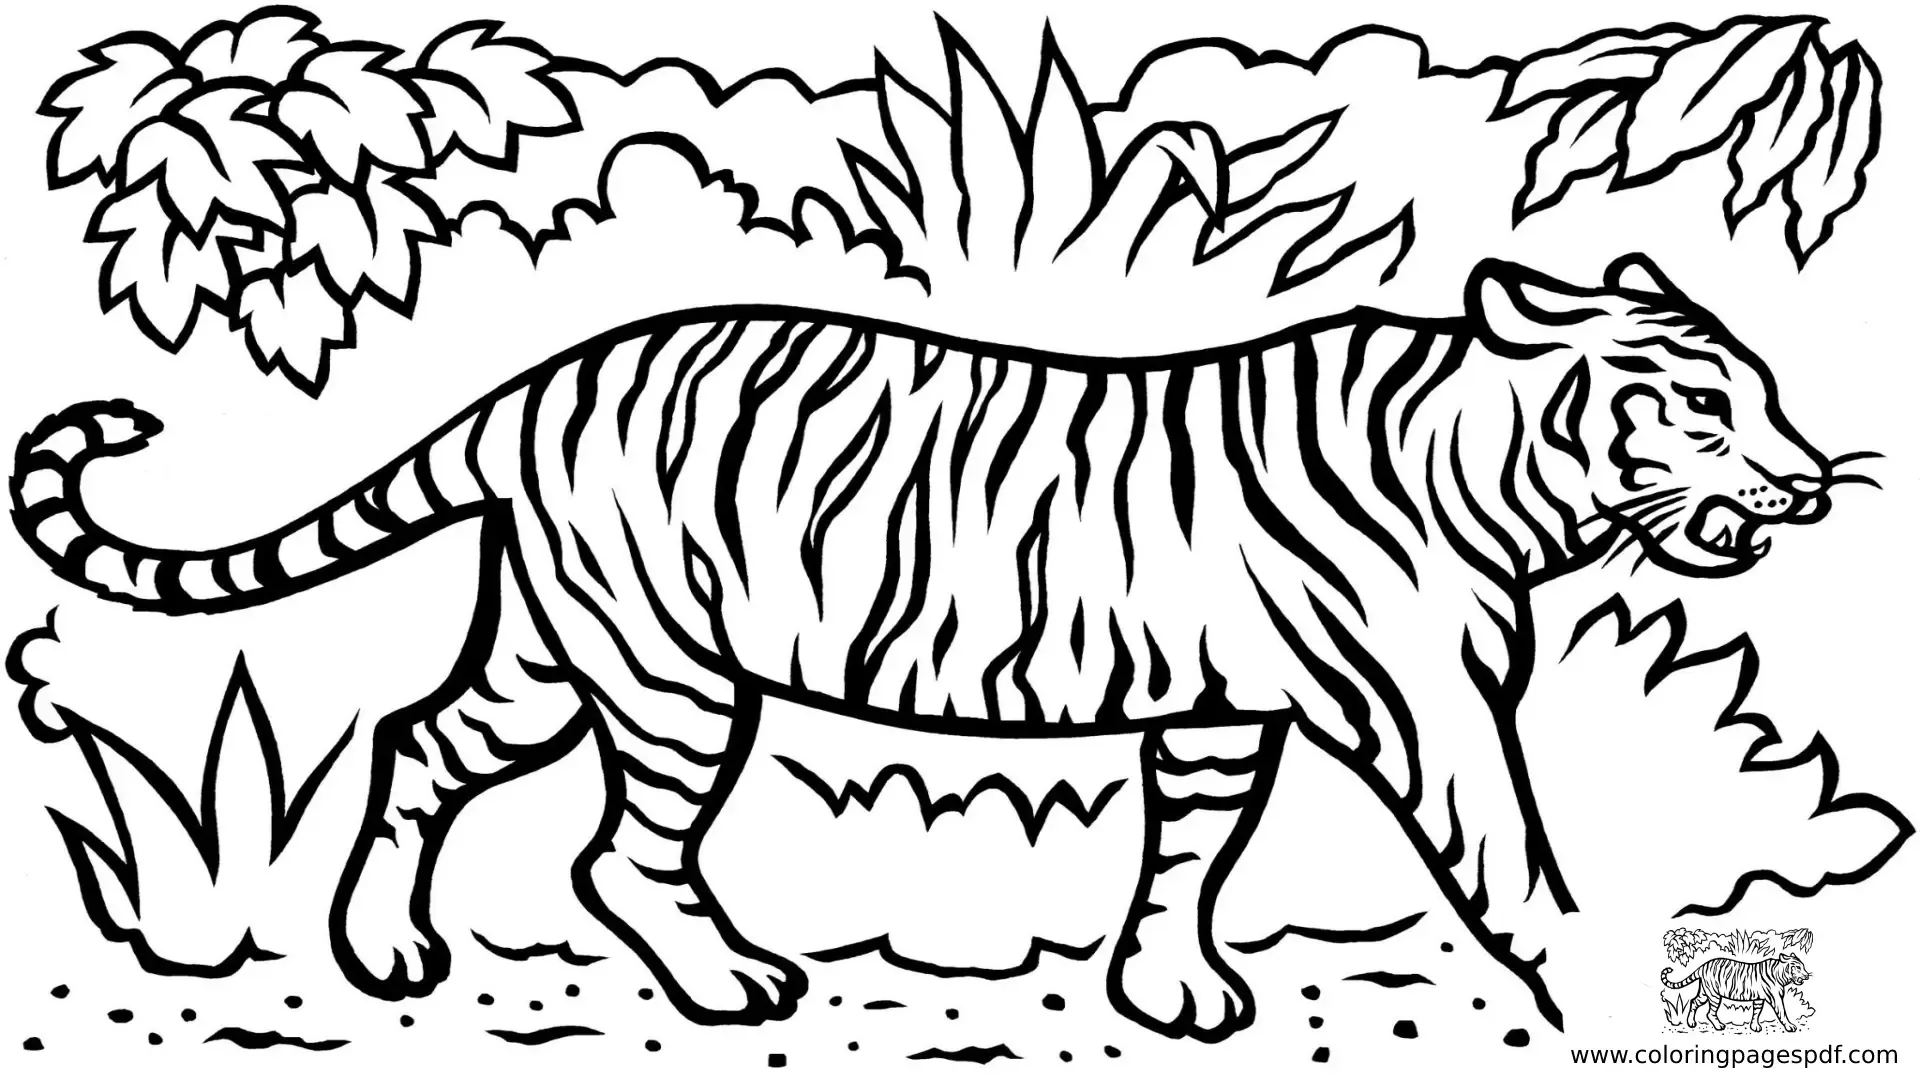 Coloring Pages Of A Tiger Walking In A Forest